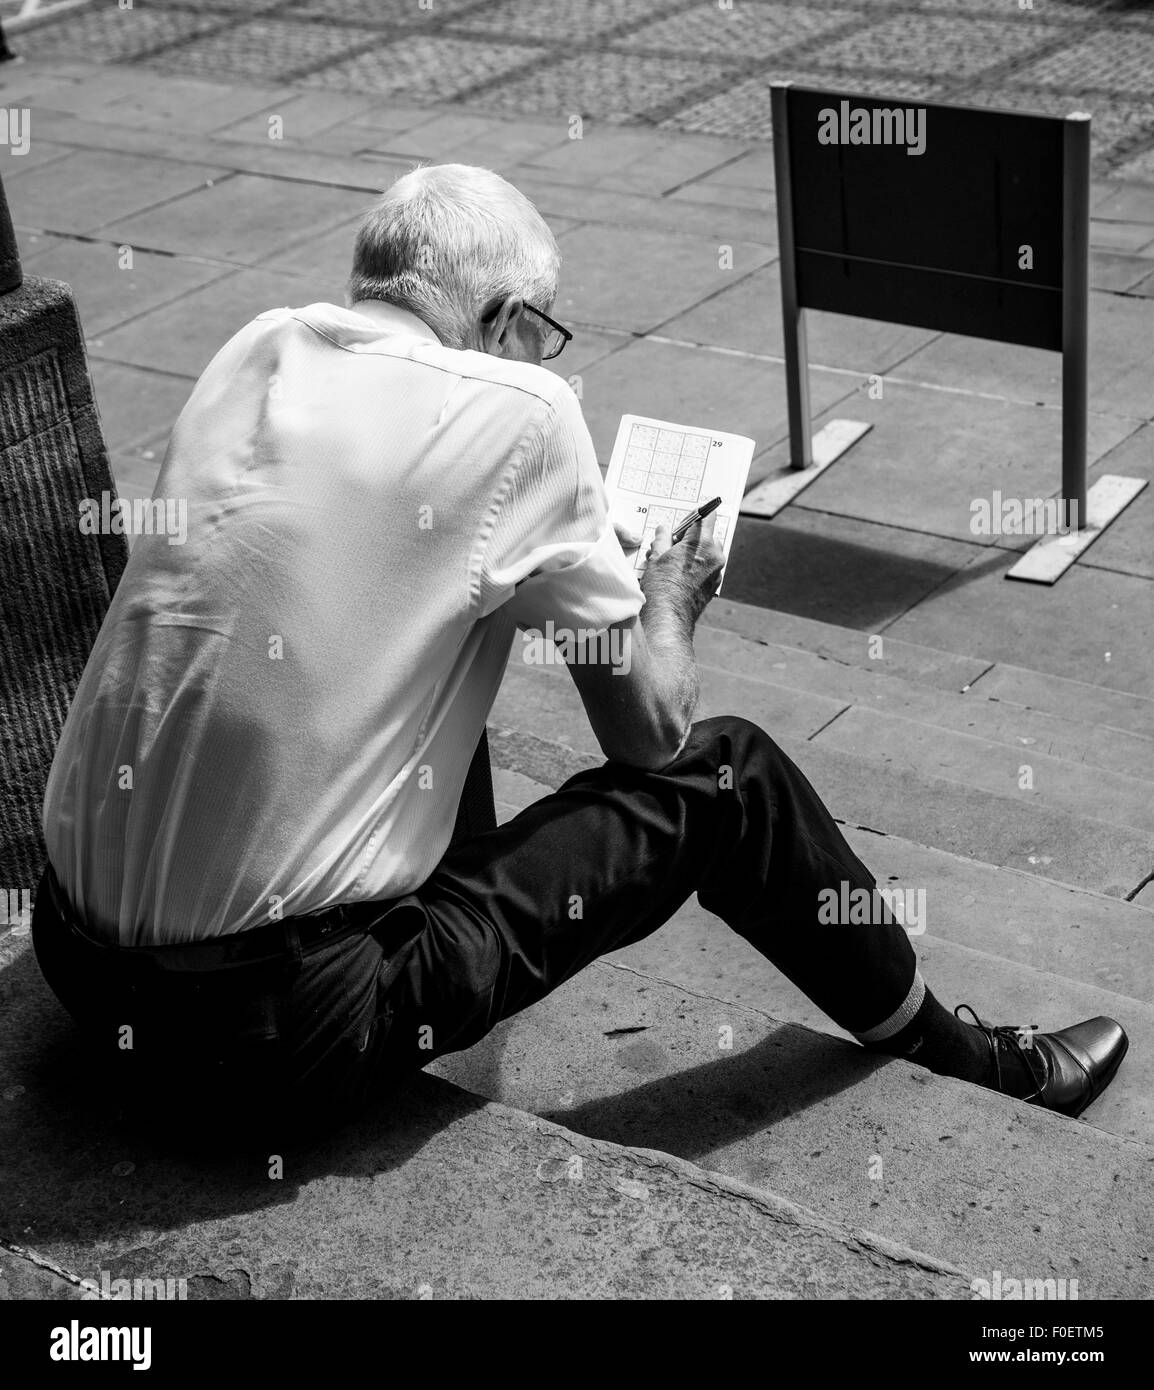 Photo of an elderly man sitting on steps and doing a crossword or sudoku puzzle Stock Photo